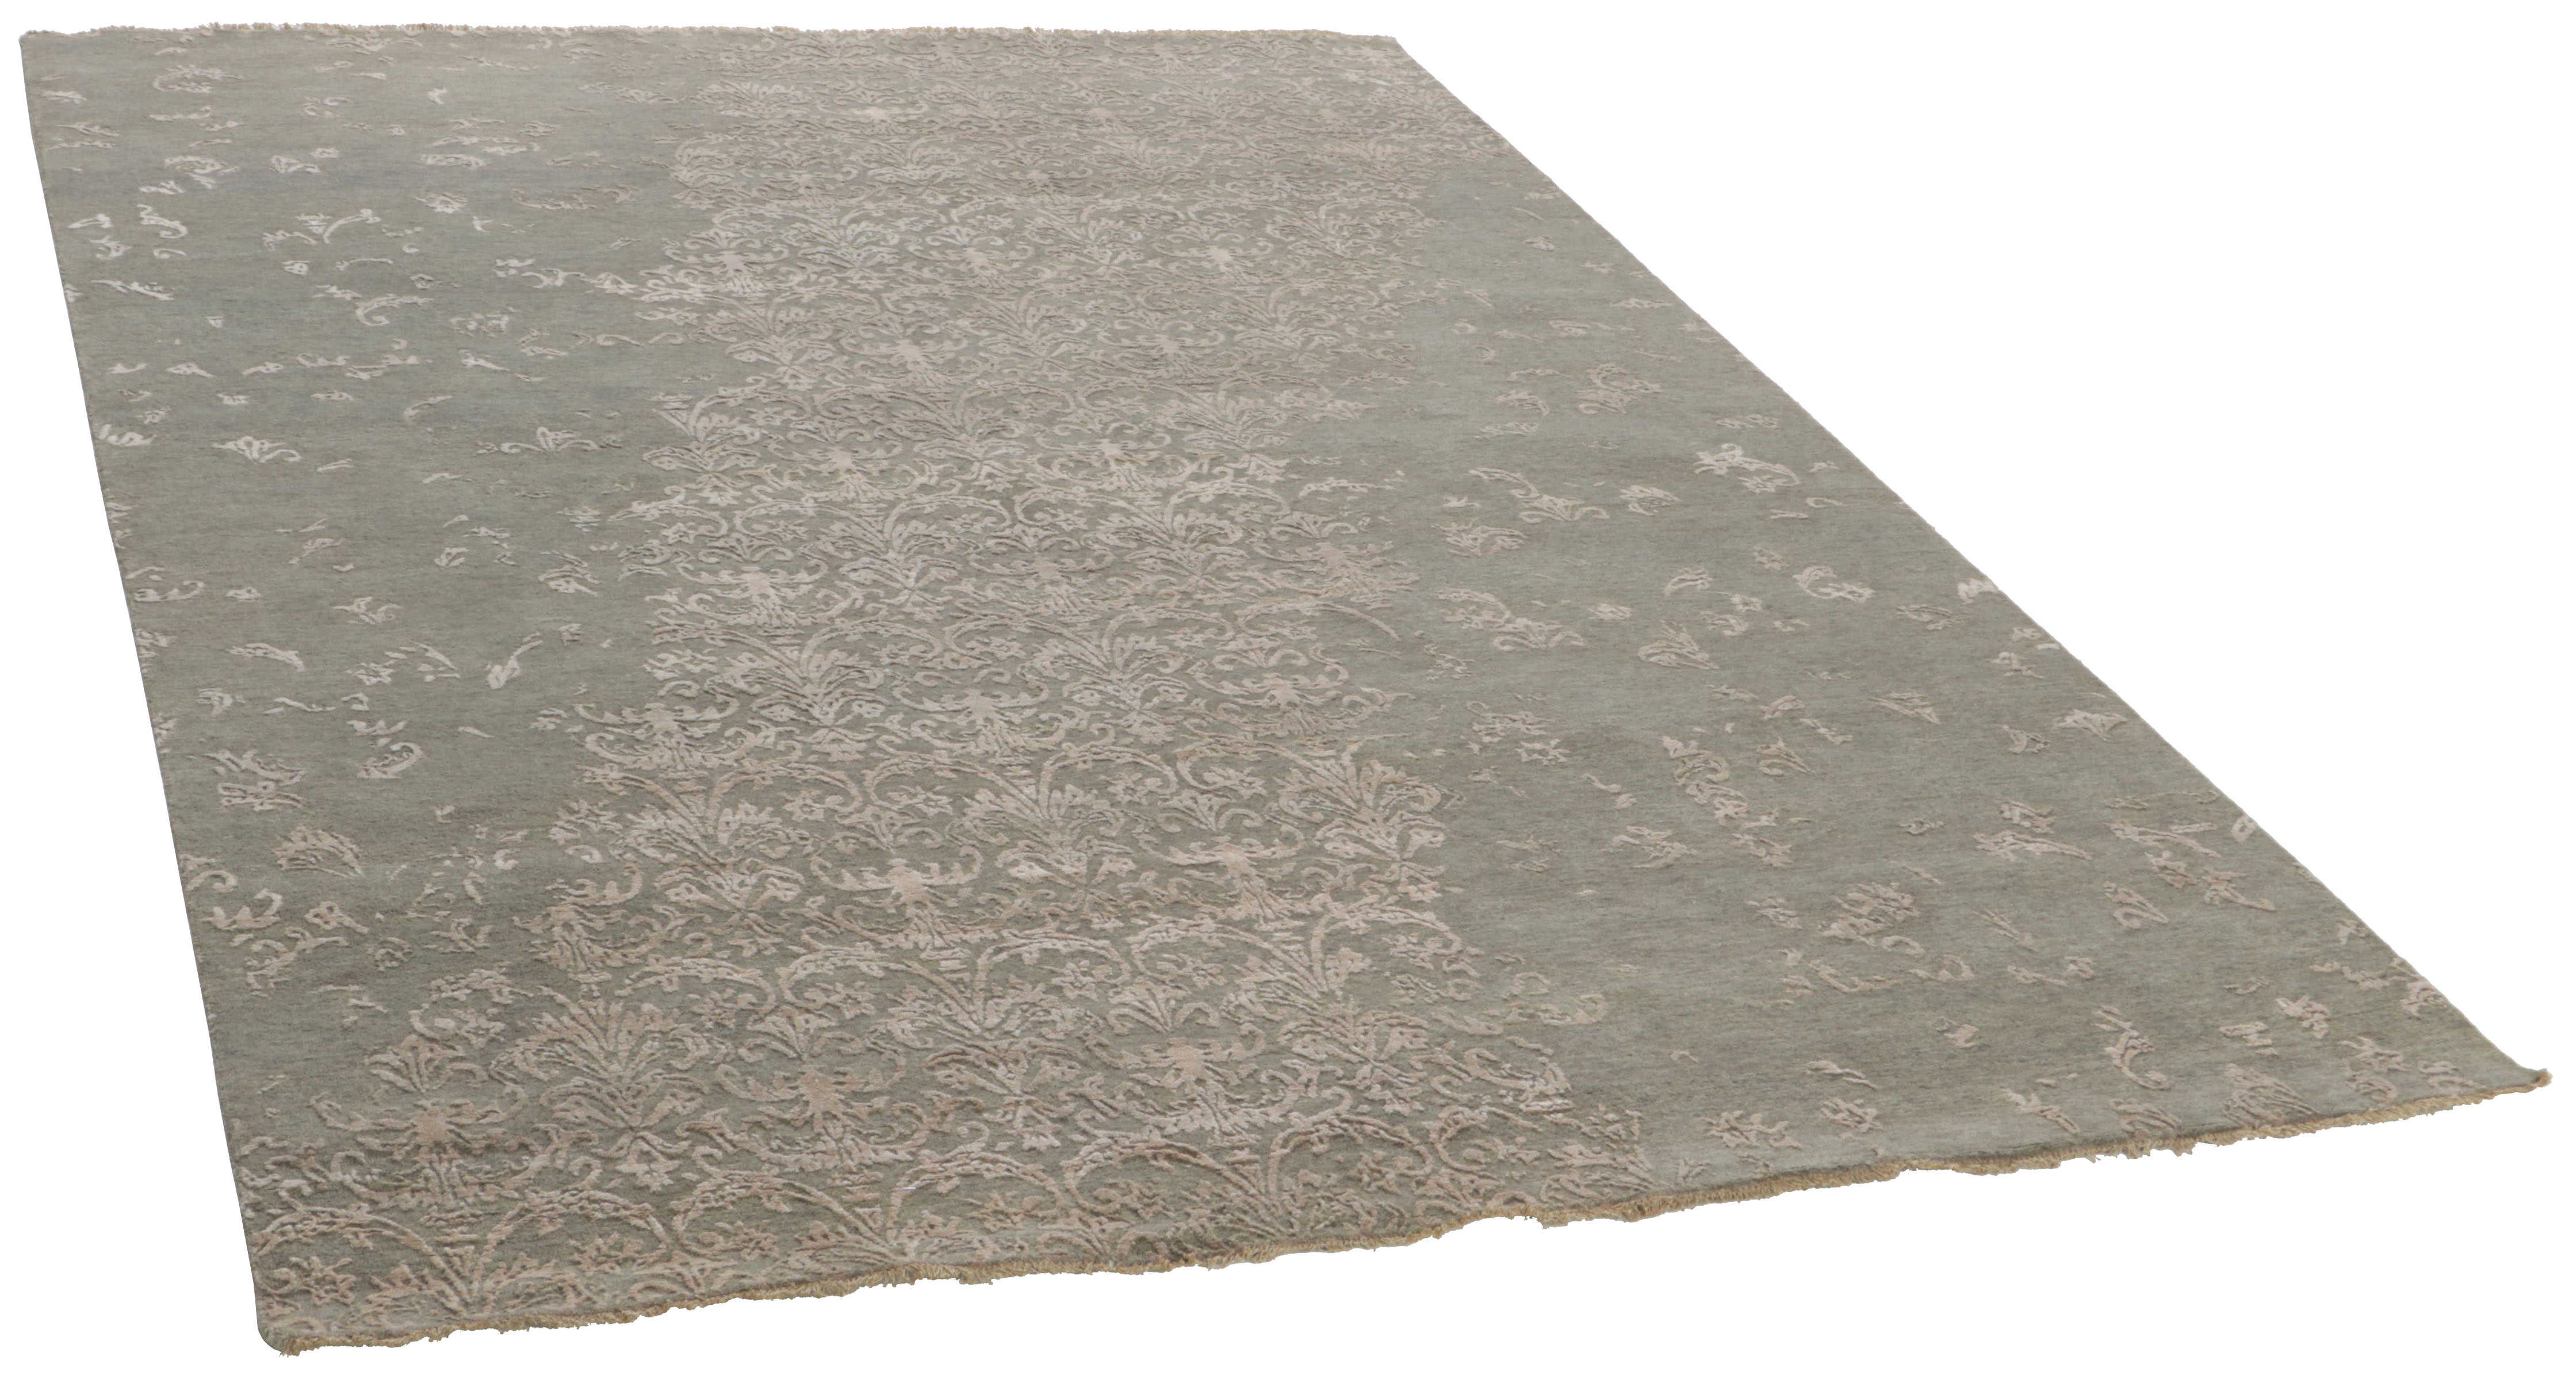 Authentic oriental rug with a damask pattern in green